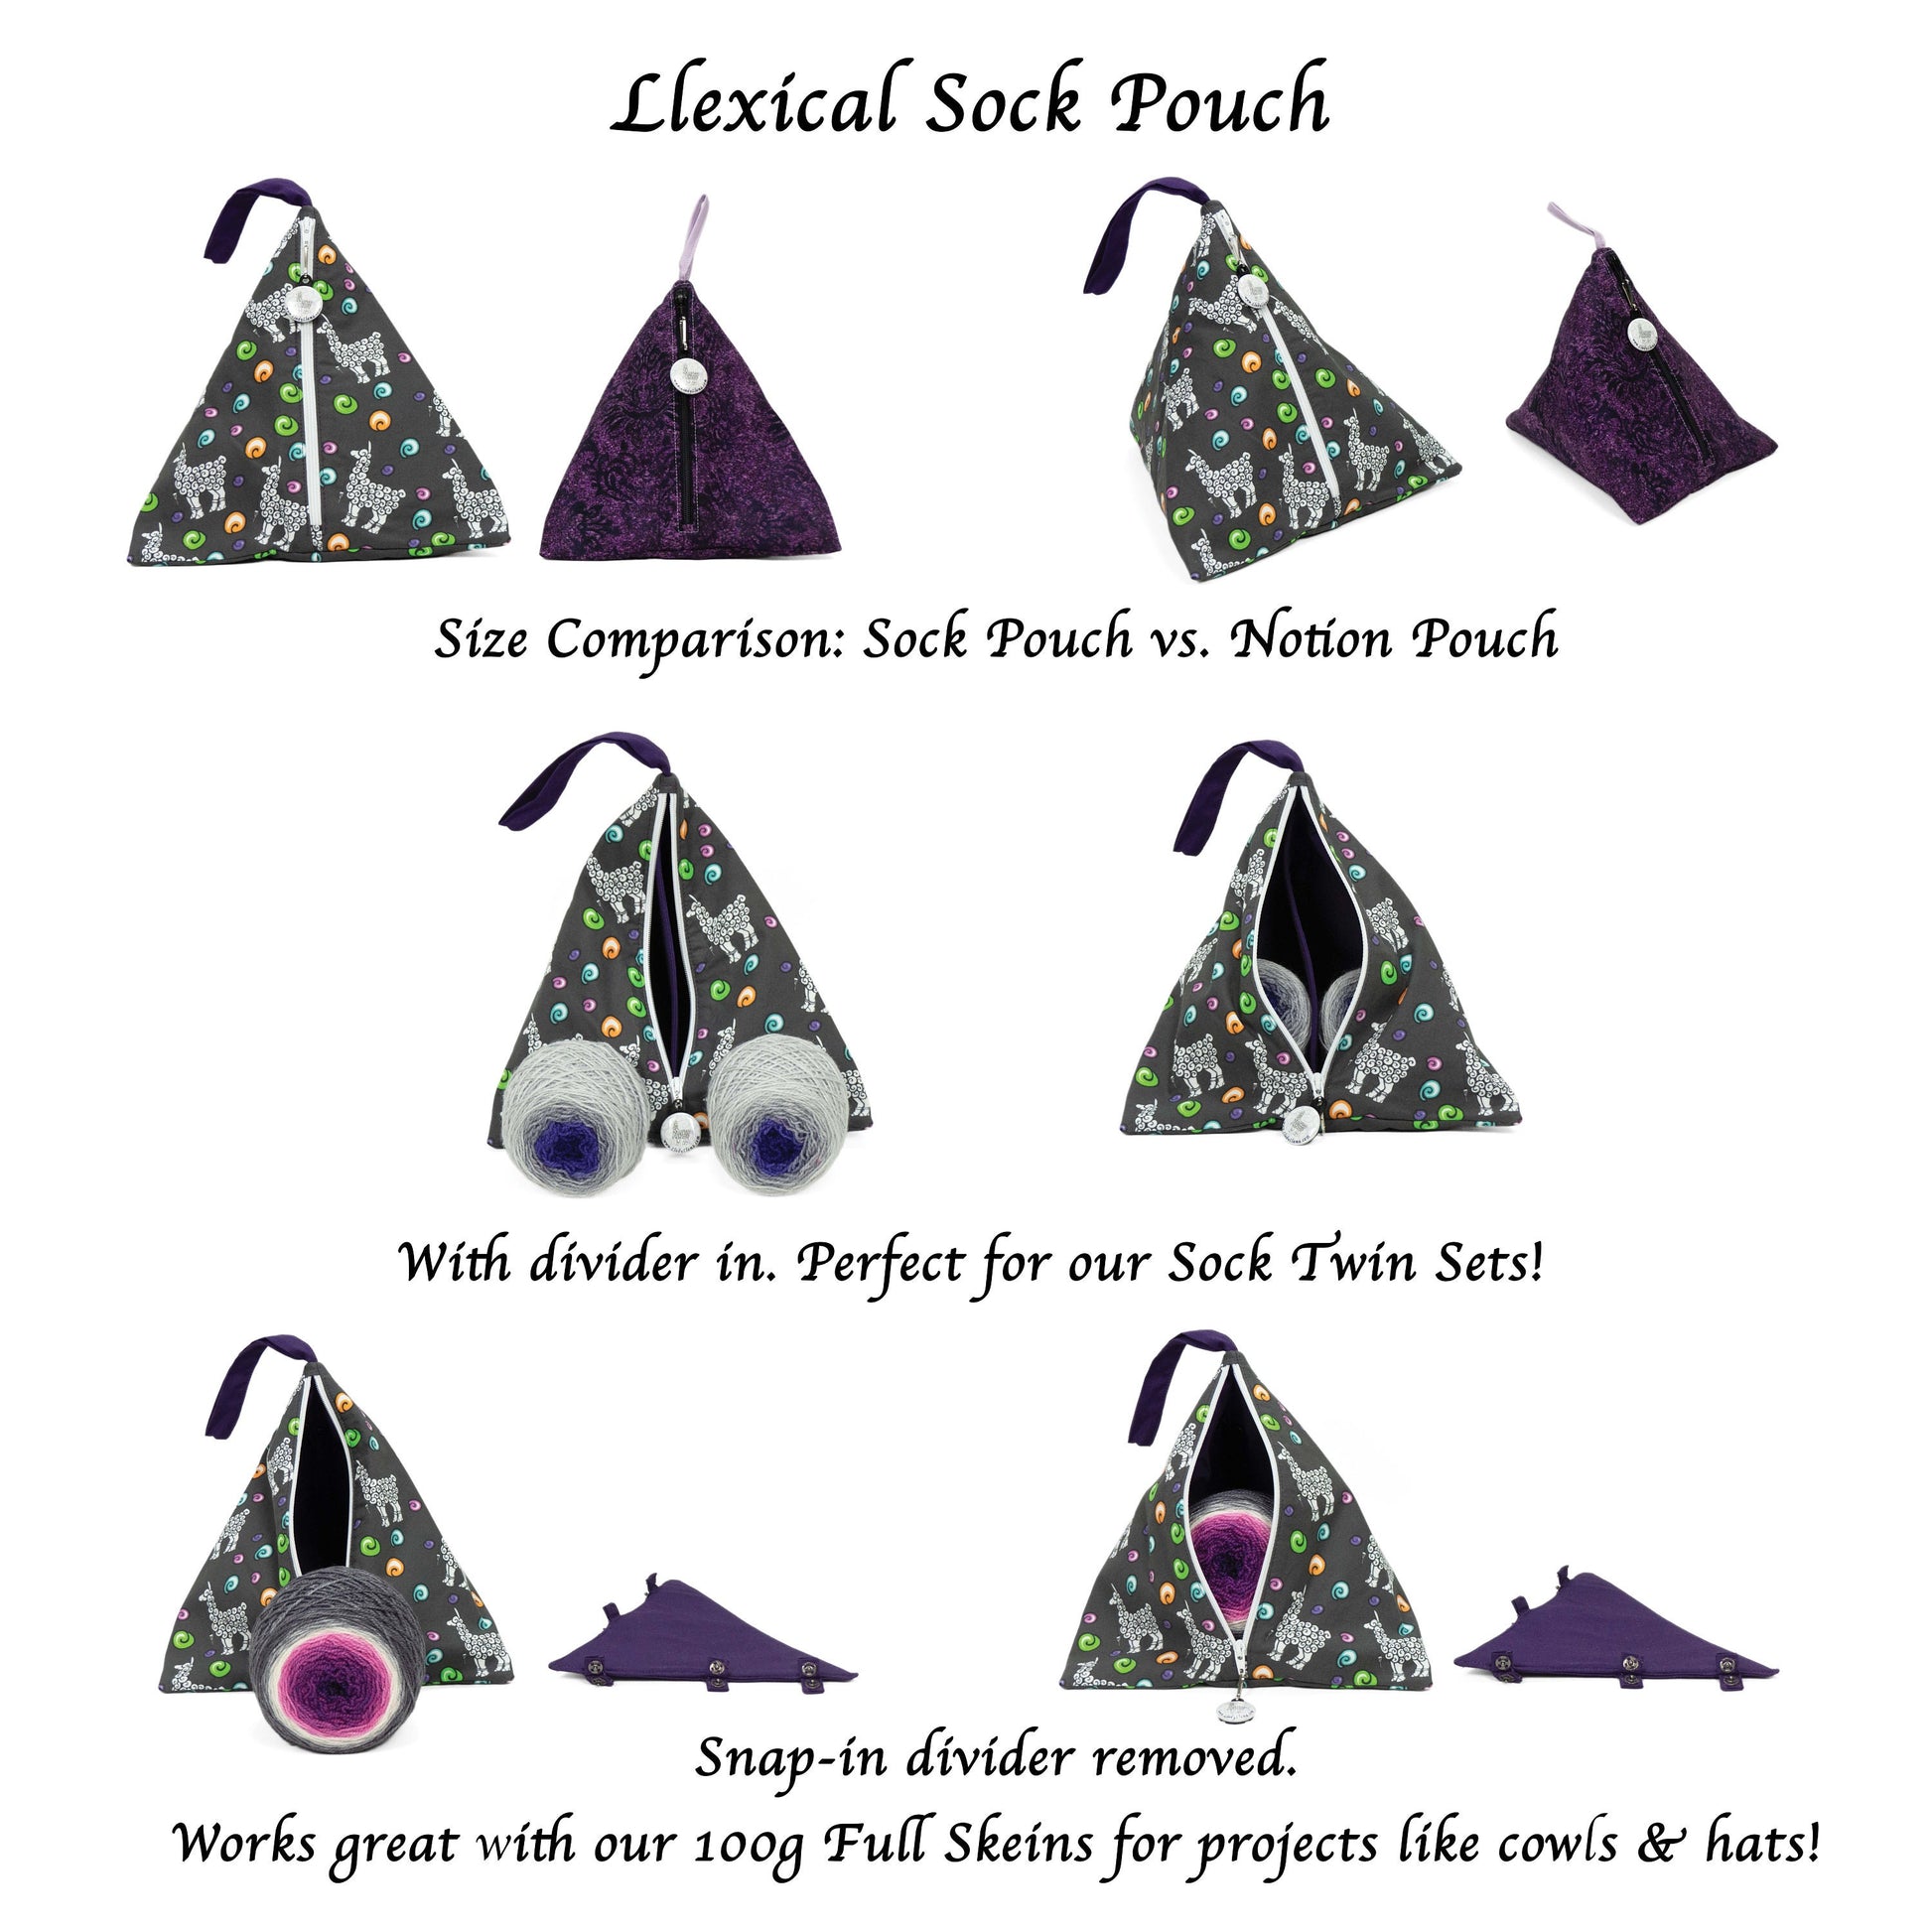 Metallic Dark Pebbles - Llexical Divided Sock Pouch - Knitting, Crochet, Spinning Project Bag